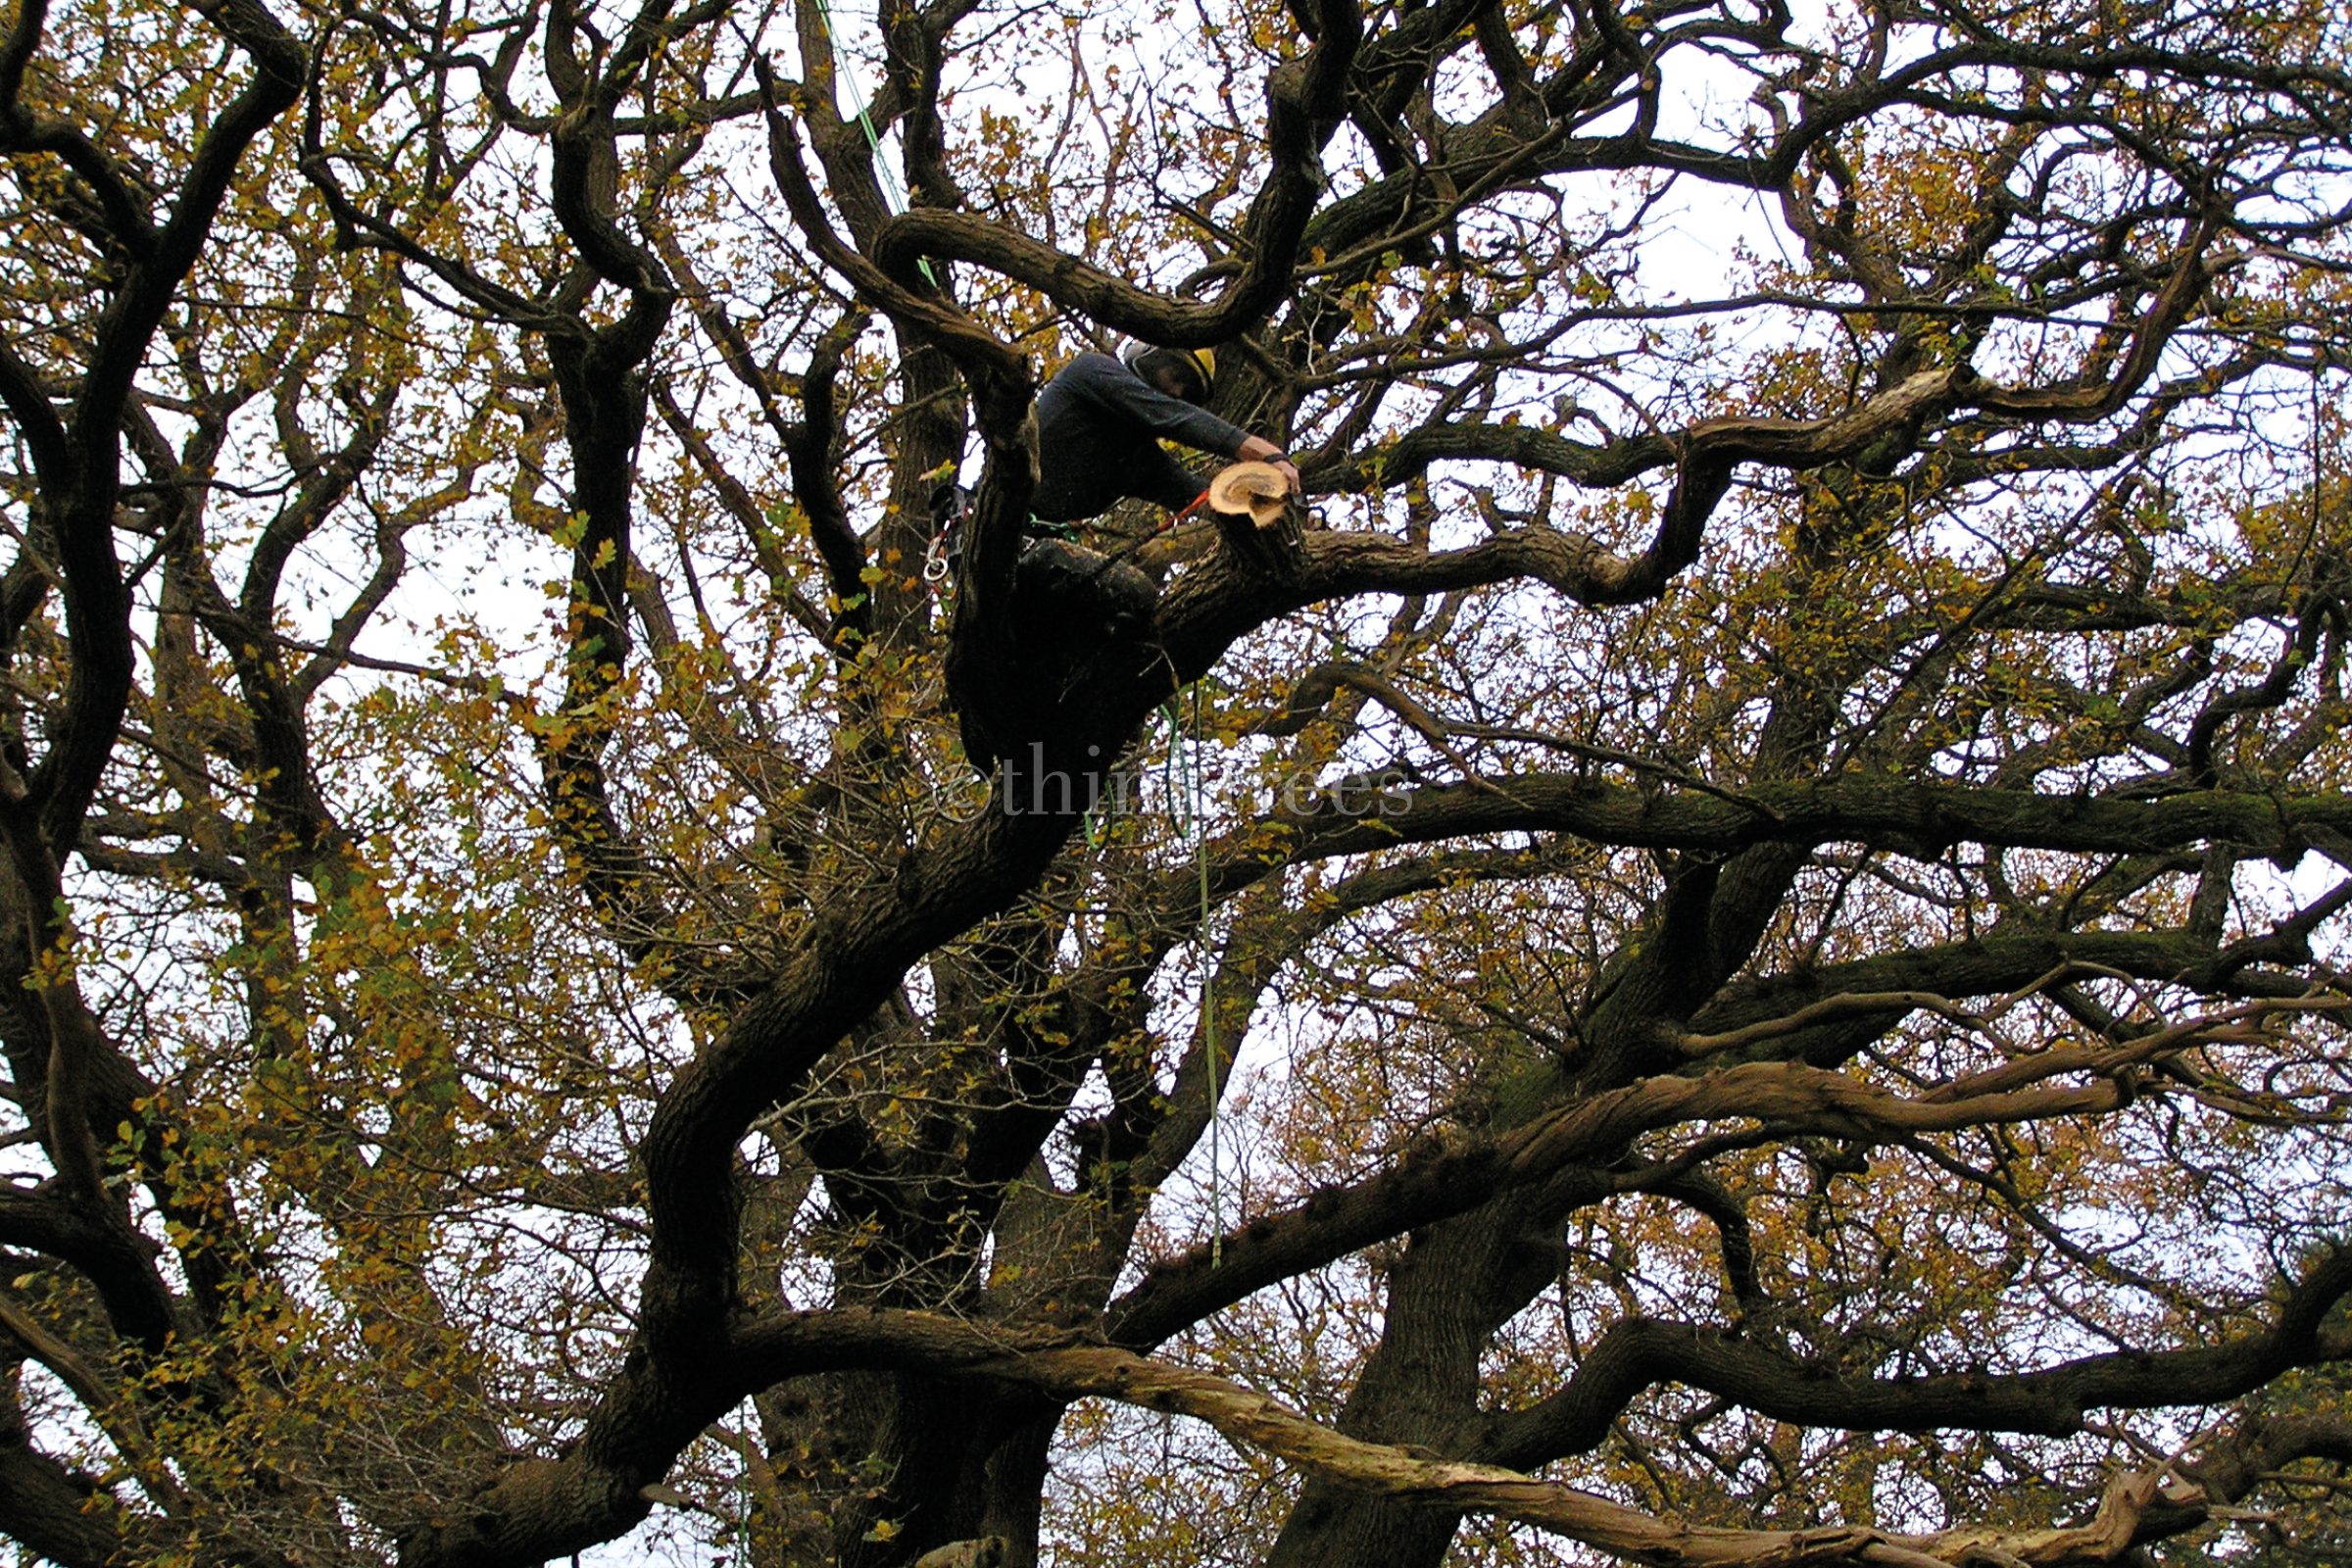 Arborist carrying out end weight reduction of a poorly tapered structural branch